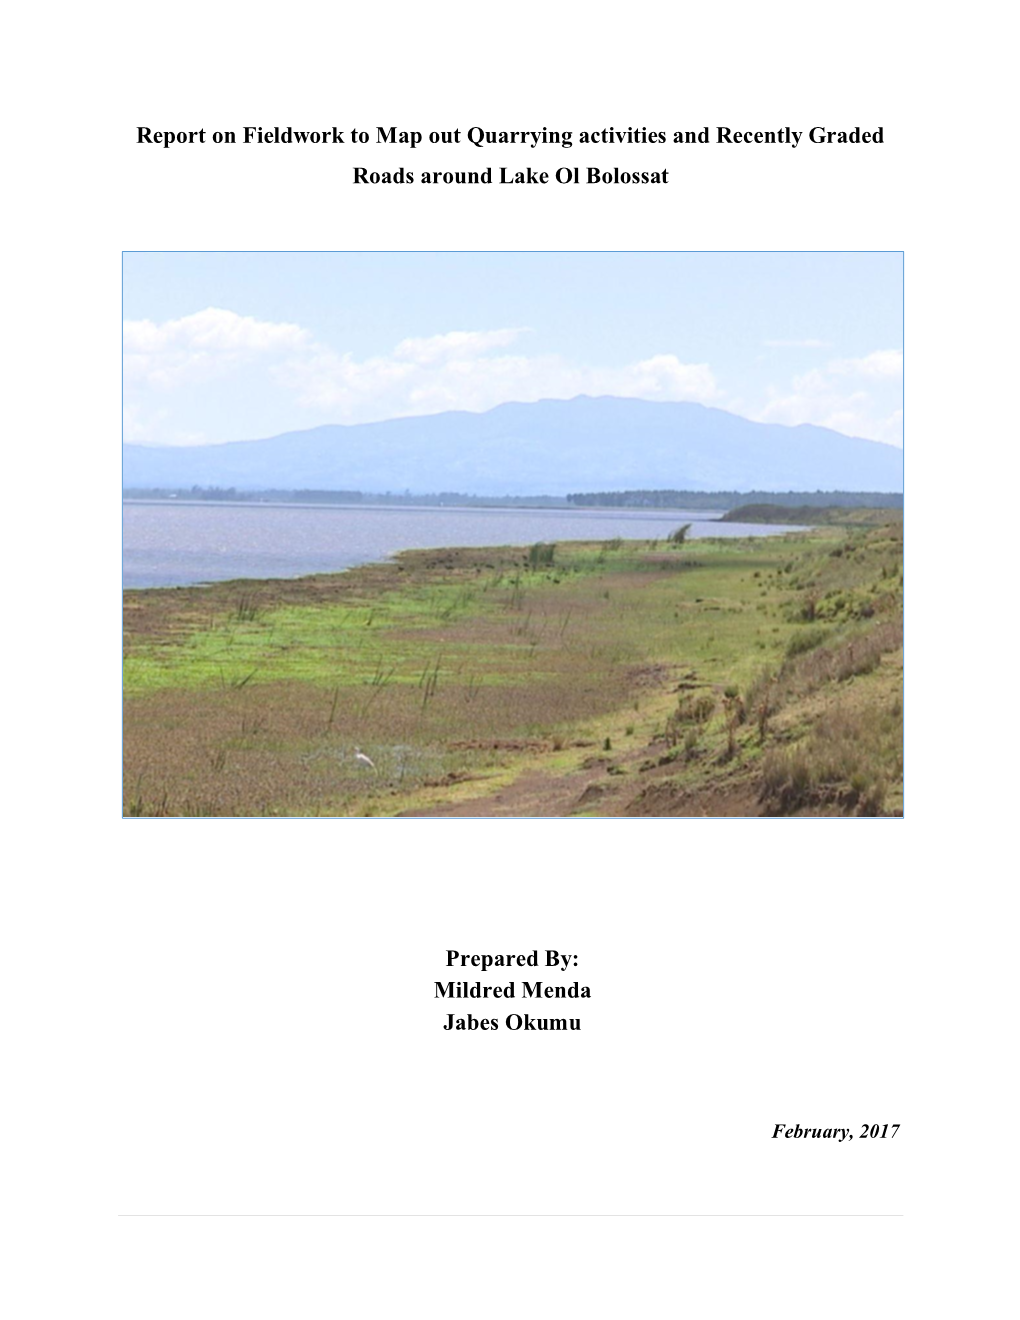 Report on Fieldwork to Map out Quarrying Activities and Recently Graded Roads Around Lake Ol Bolossat